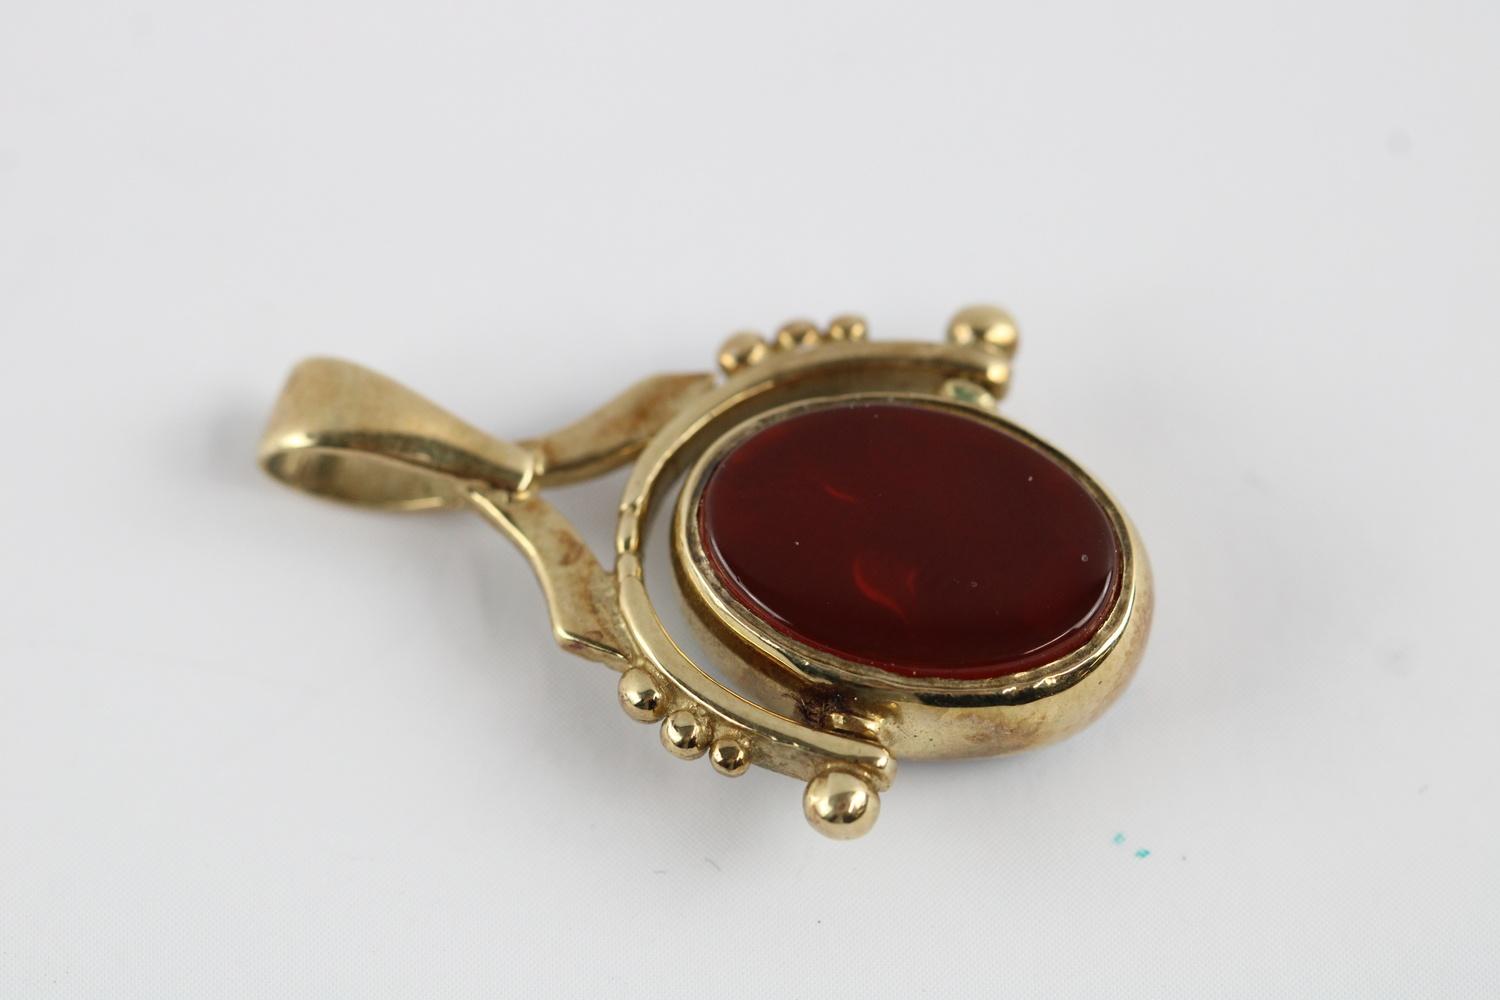 9ct Gold hardstone cameo and carnelian spinning fob - Image 2 of 3